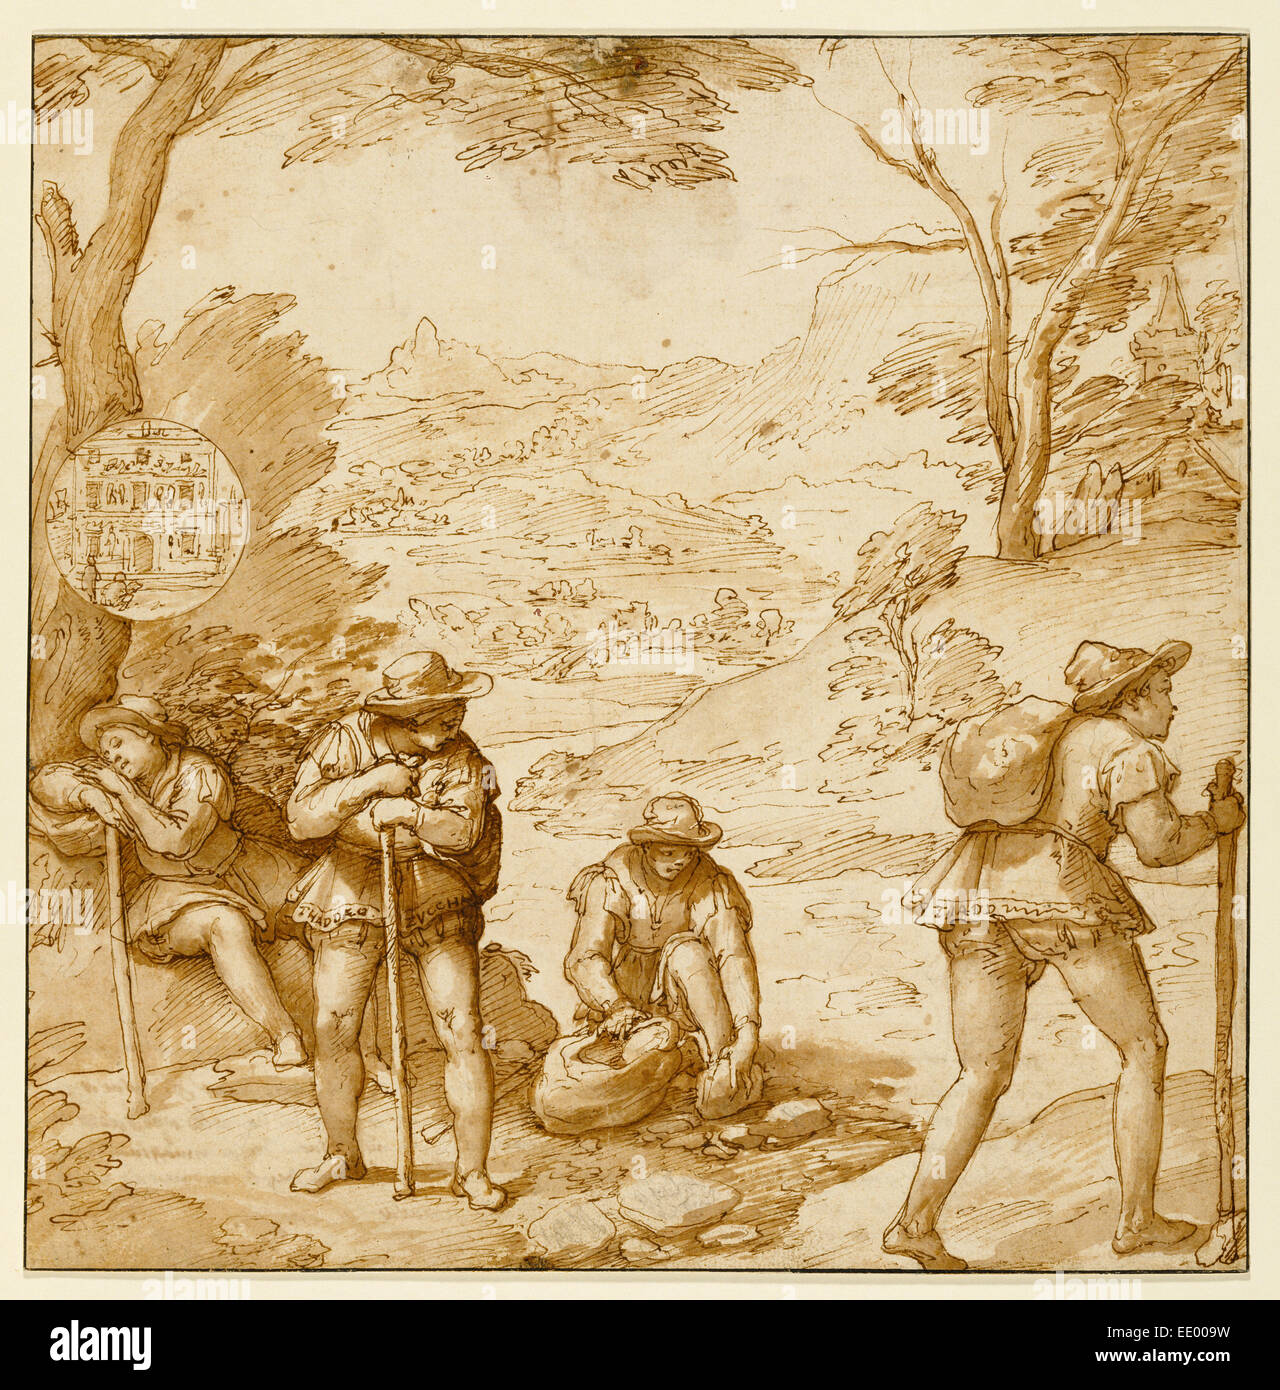 Taddeo's Hallucination; Federico Zuccaro, Italian, about 1541 - 1609; Italy, Europe; about 1595; Pen and brown ink Stock Photo